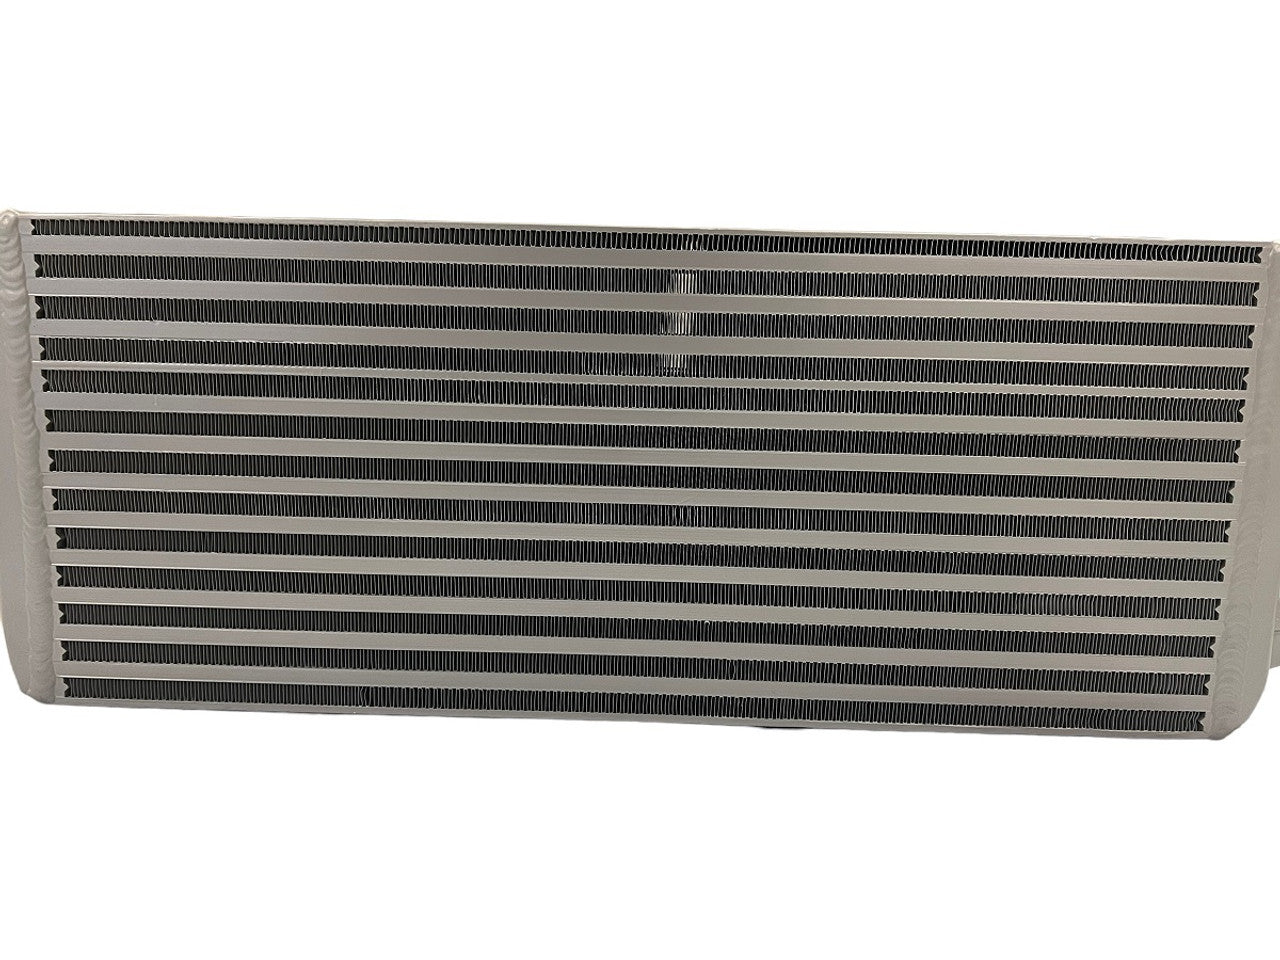 MAD-013 MAD BMW E chassis 5" HD intercooler N54 N55 135 1M 335 (Stepped Core)